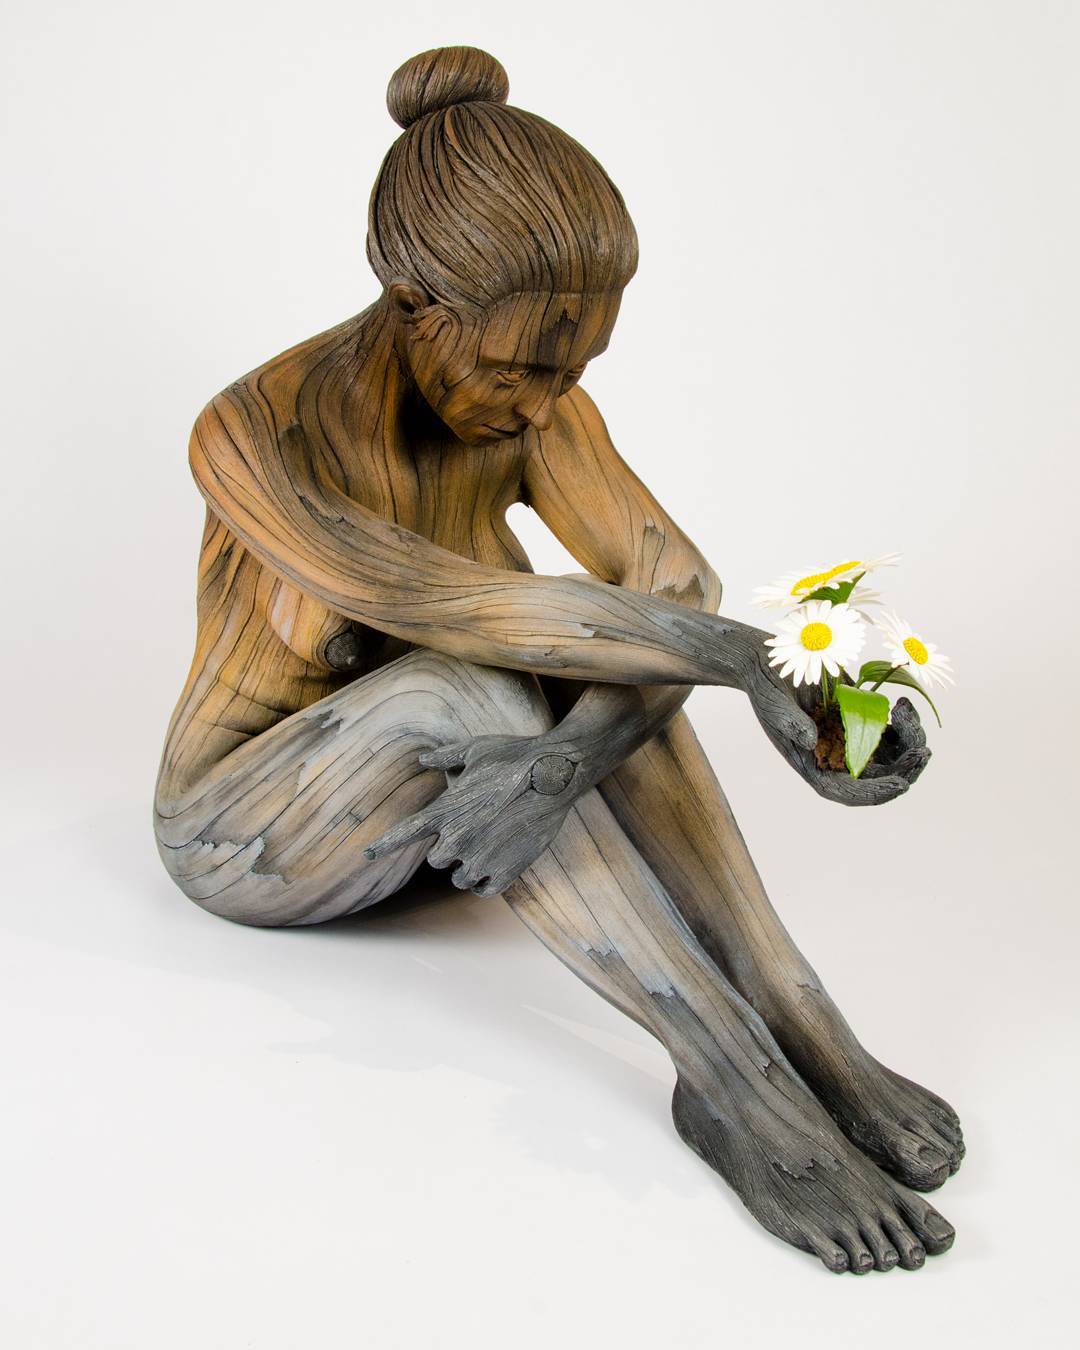 Humans And Nature, Poetic And Illusionistic Ceramic Sculptures By Christopher David White (9)